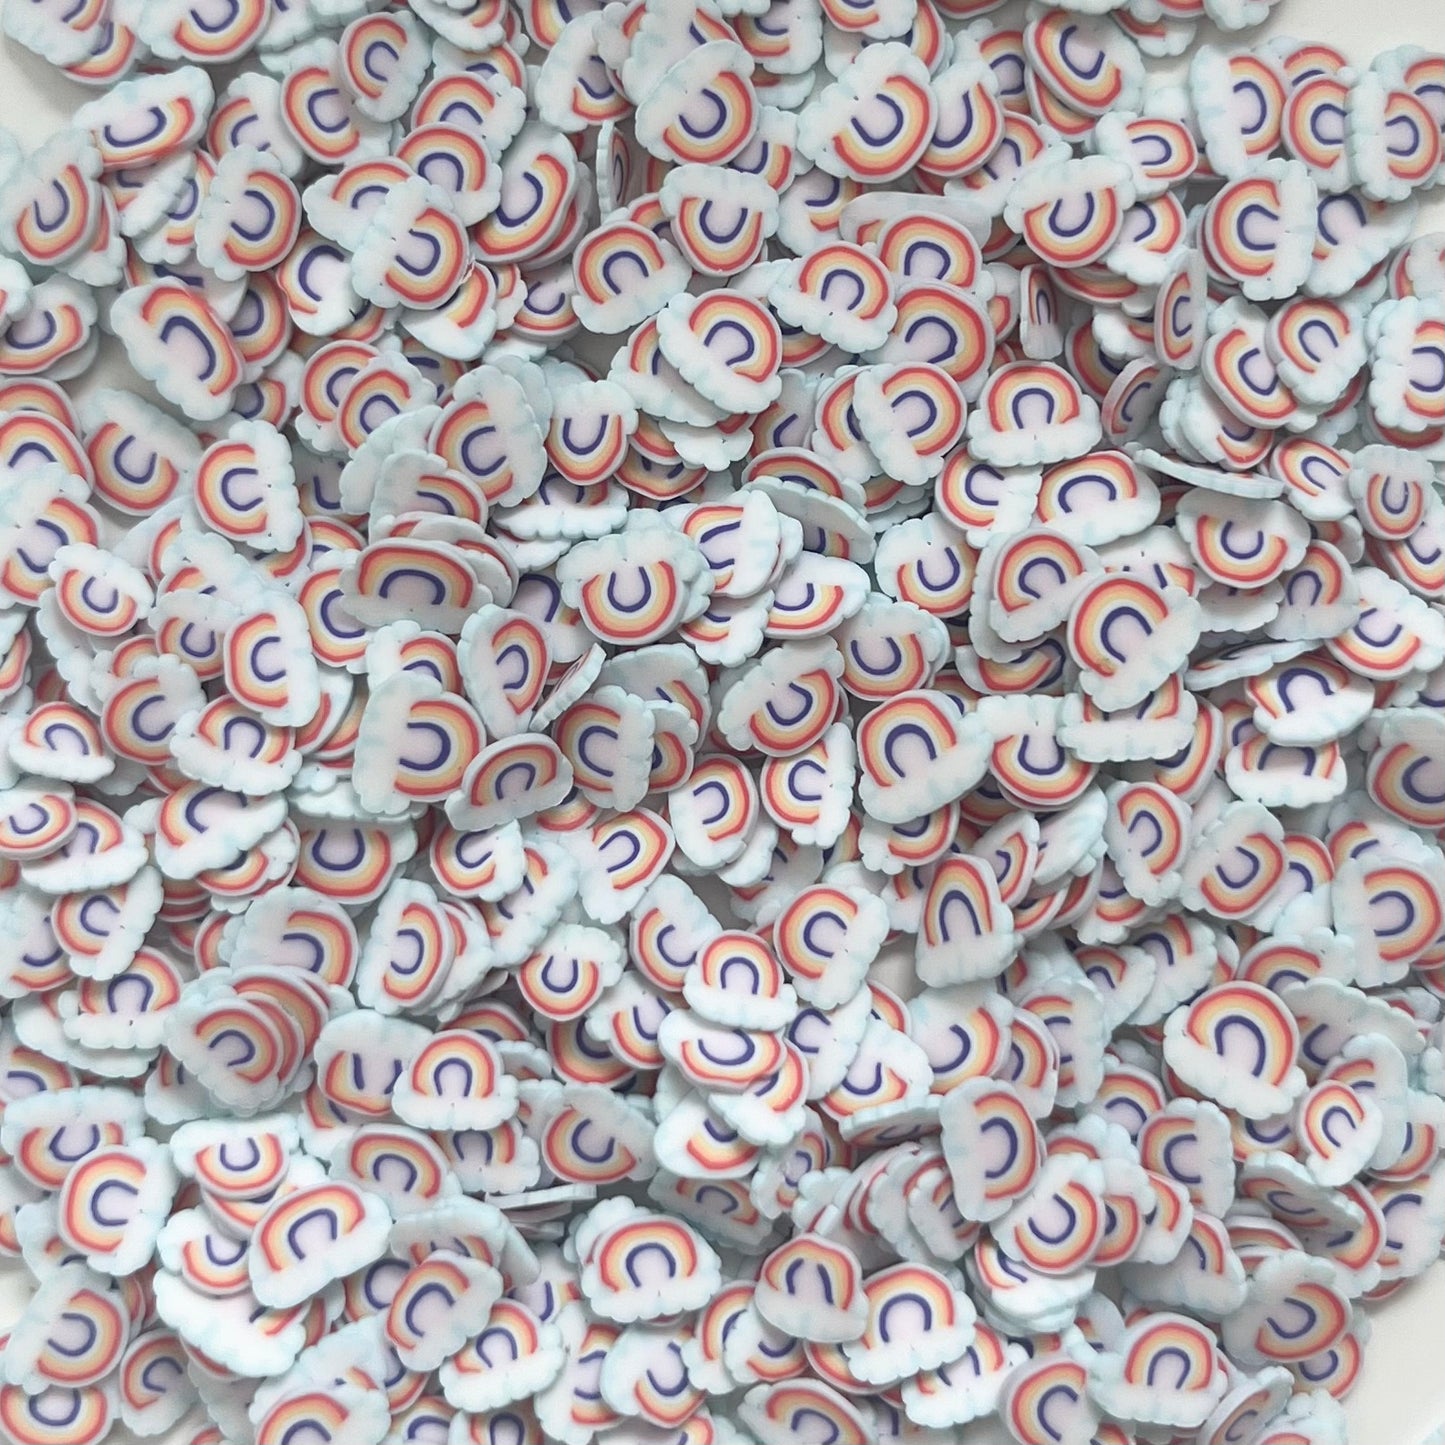 Chasing Rainbows - Polymer Clay Slices